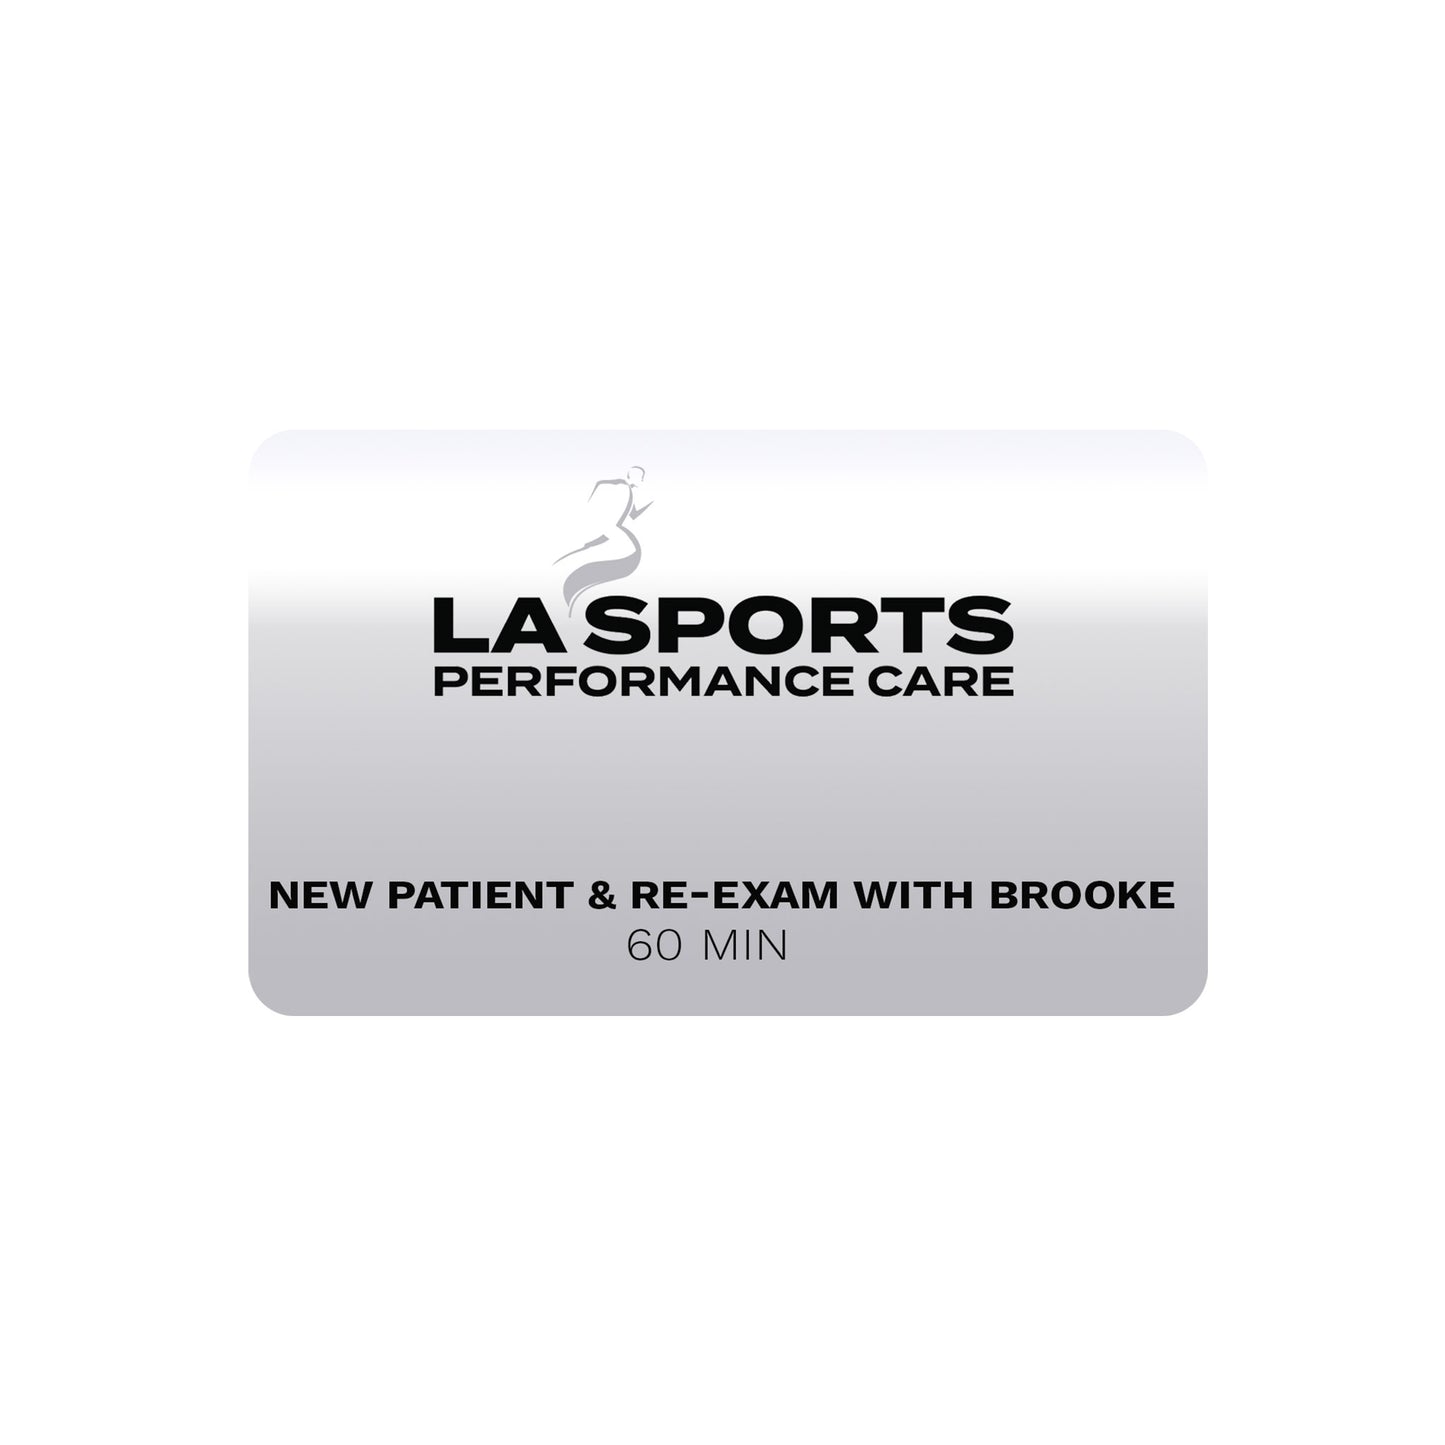 NEW PATIENT & RE-EXAM WITH BROOKE   60 MIN